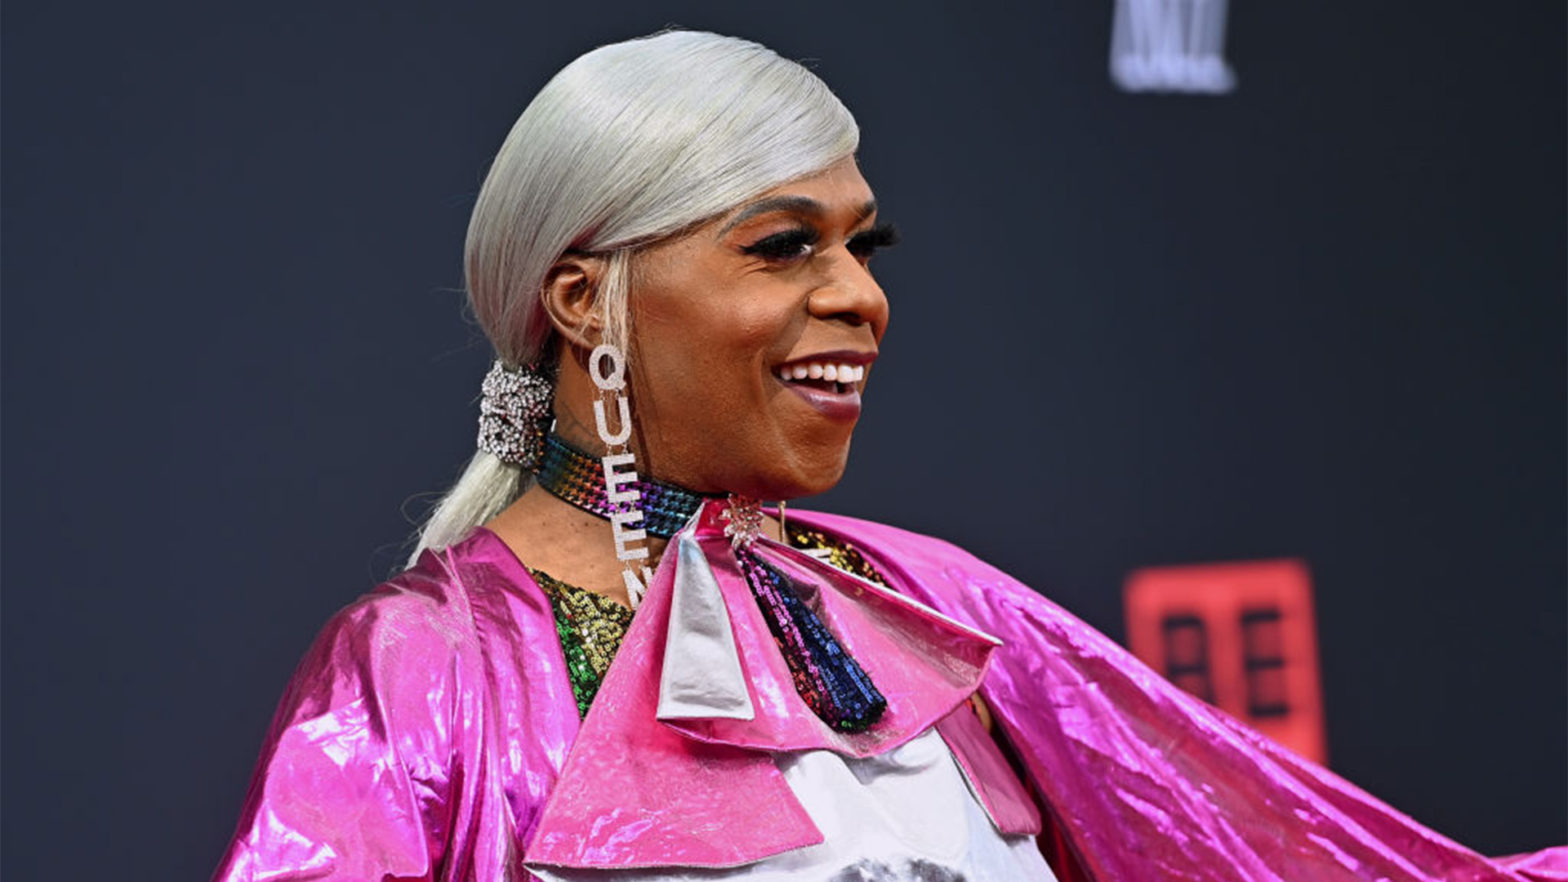 Big Freedia Set To Make History As One Of New Orleans' First Black Hotel Owners